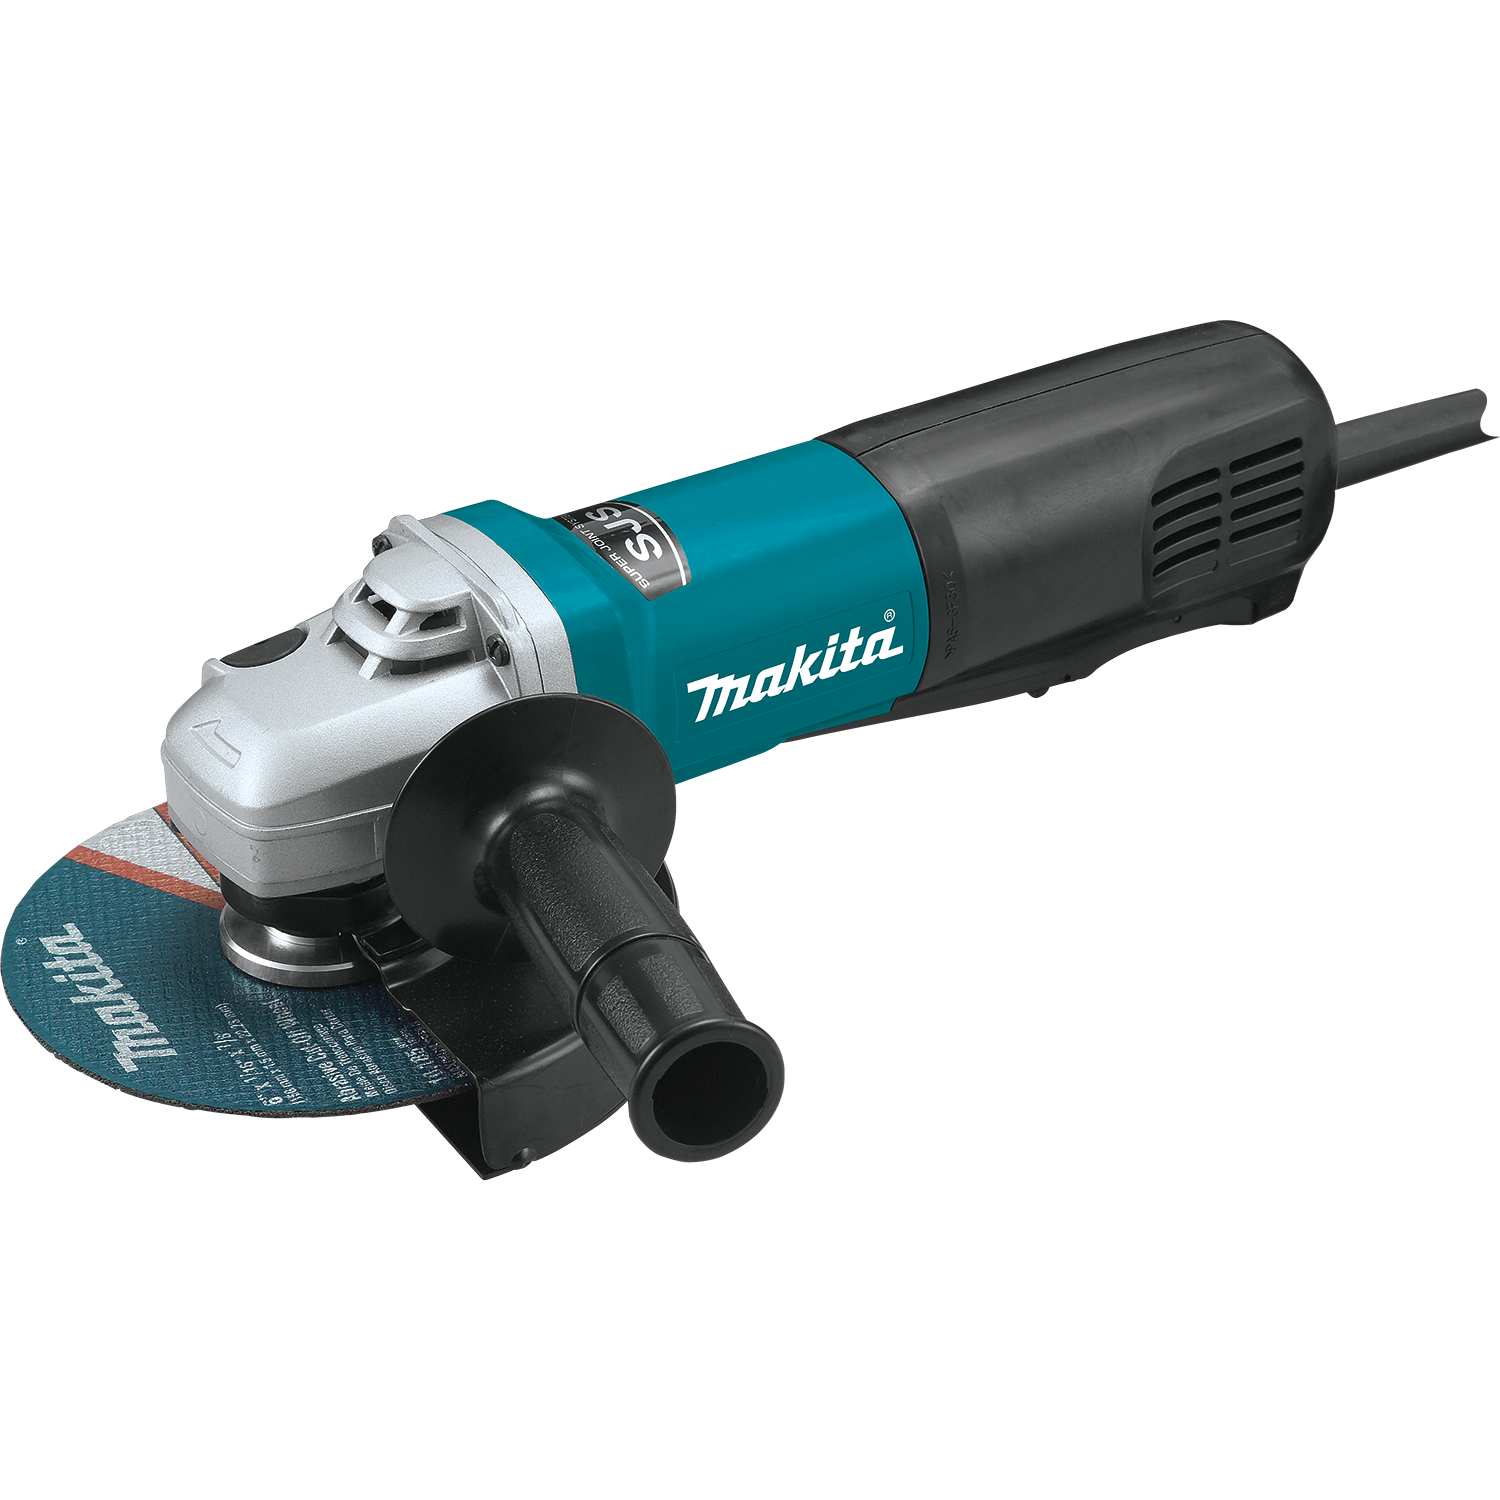 Makita 6 Inch SJS High-Power Paddle Switch Cut-Off/Angle Grinder from Columbia Safety